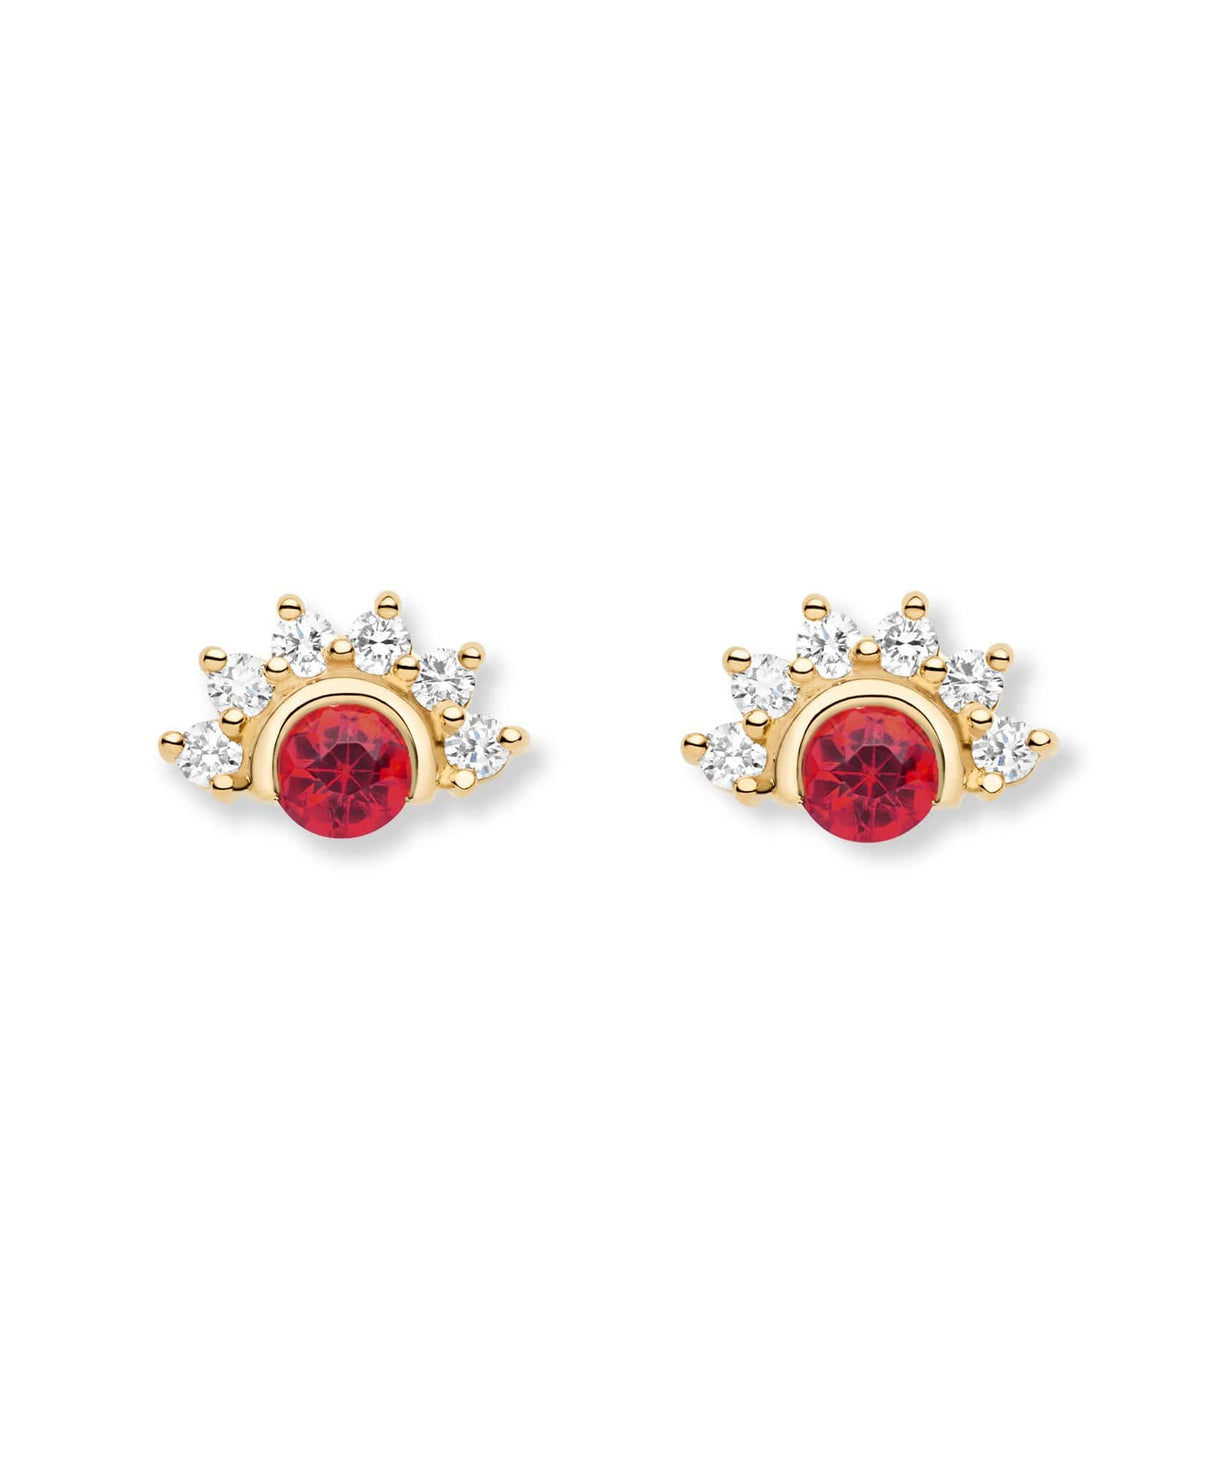 Red Spinel Studs: Discover Luxury Fine Jewelry | Nouvel Heritage || White Gold